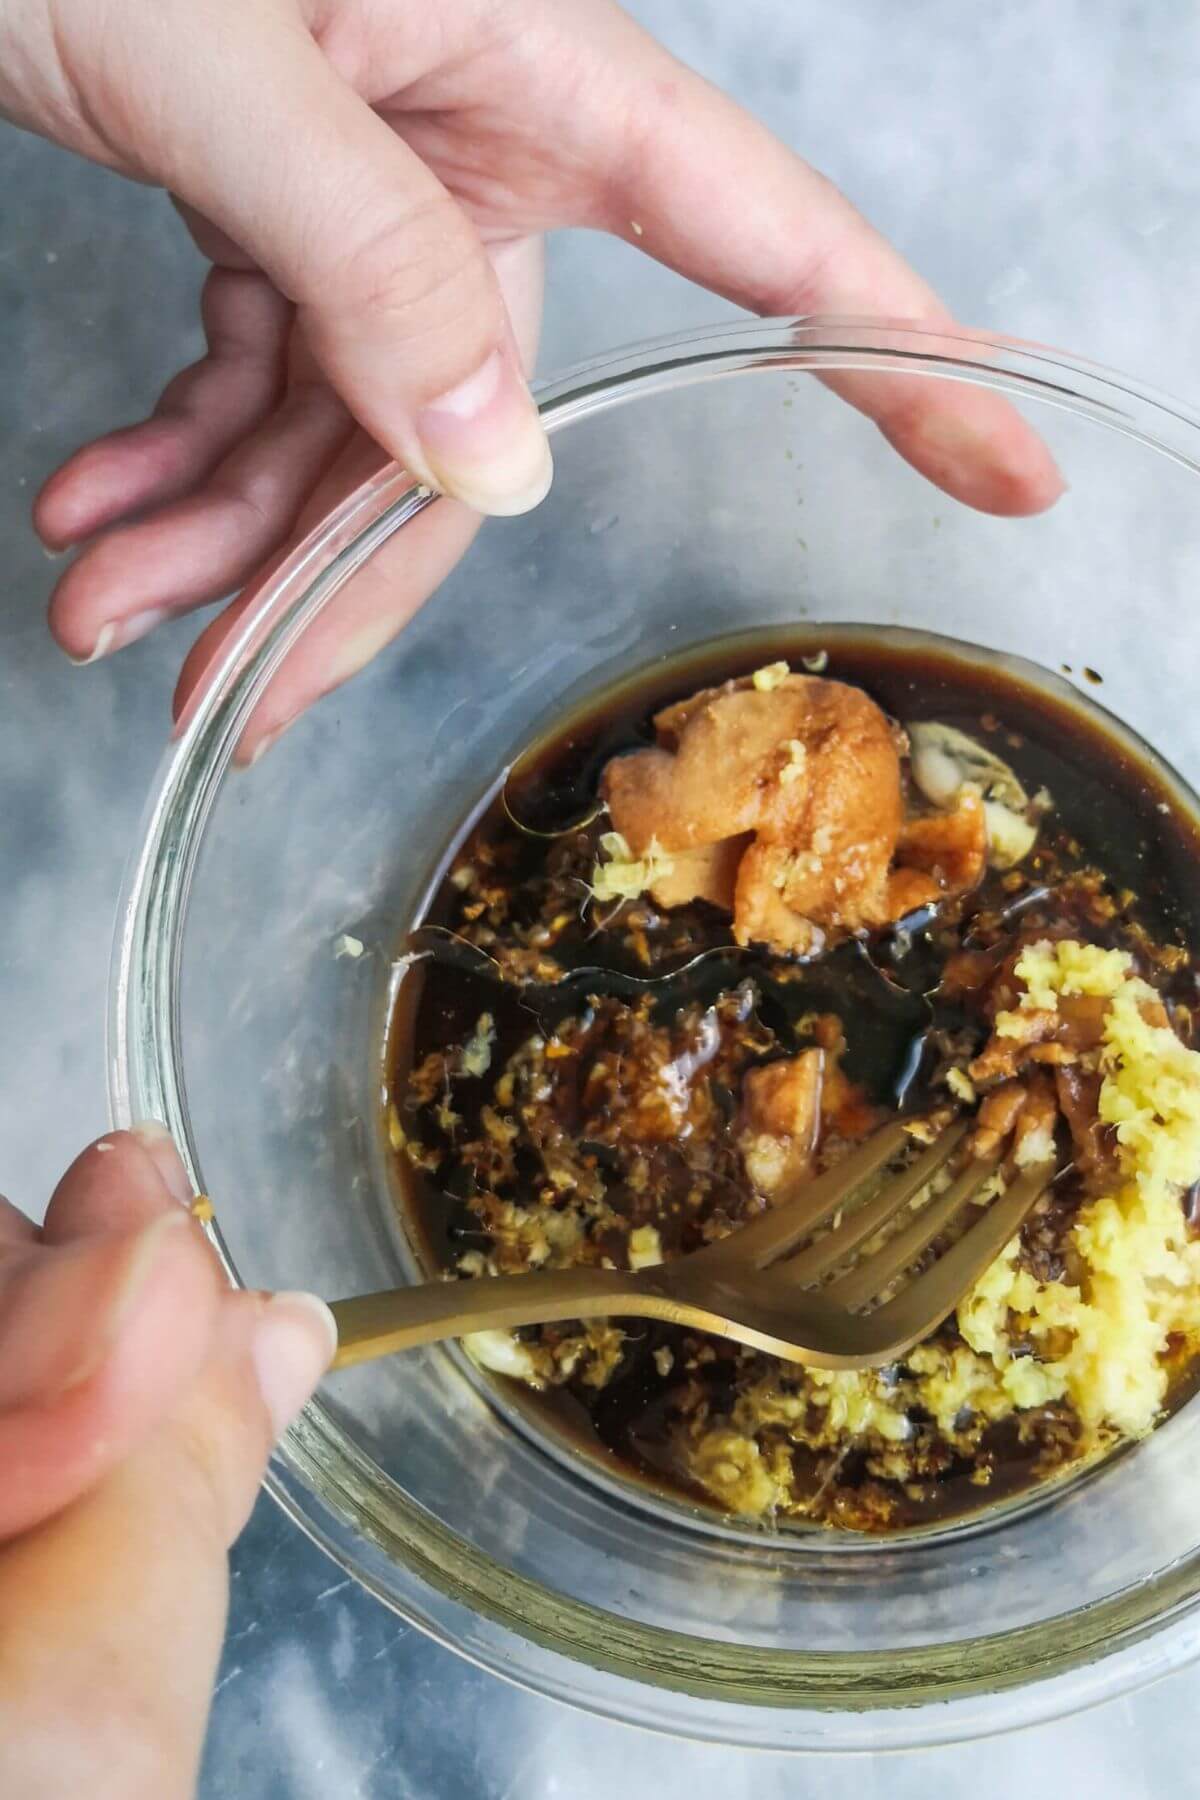 Mixing miso marinade ingredients in a small glass bowl with a gold fork.